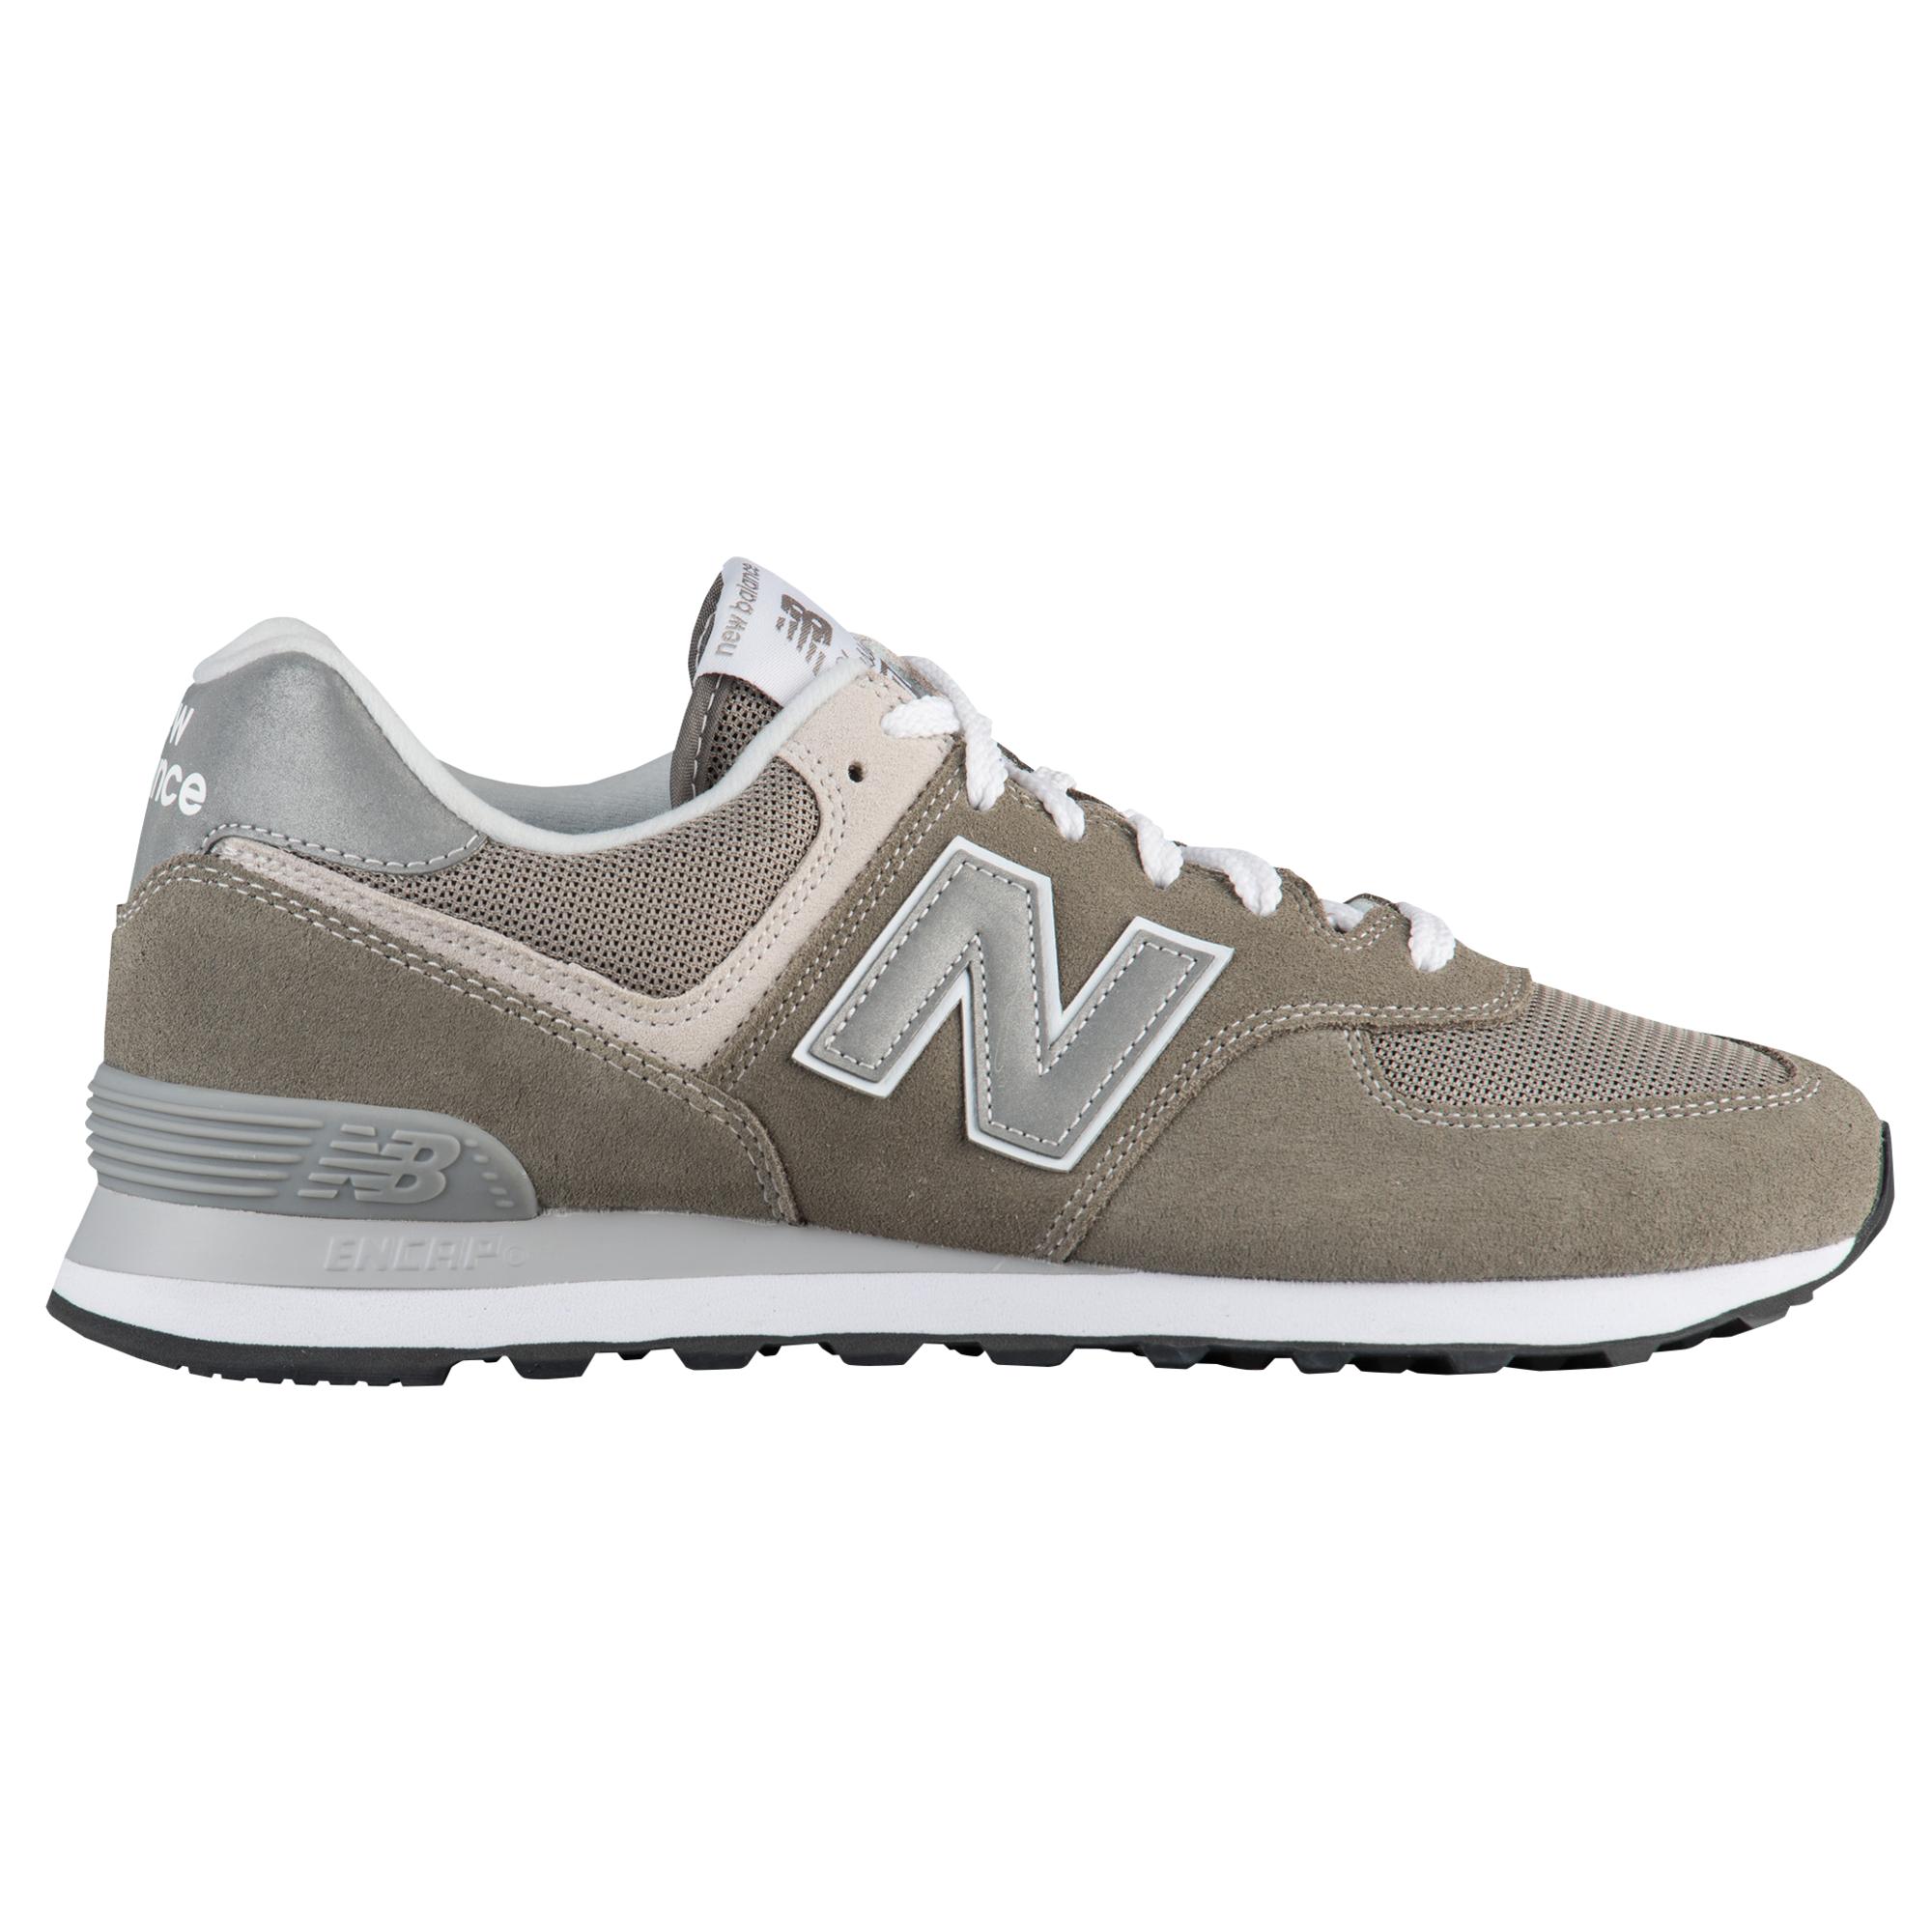 New Balance Leather 574 Classic Running Shoes in Grey (Gray) for Men - Save  35% - Lyst